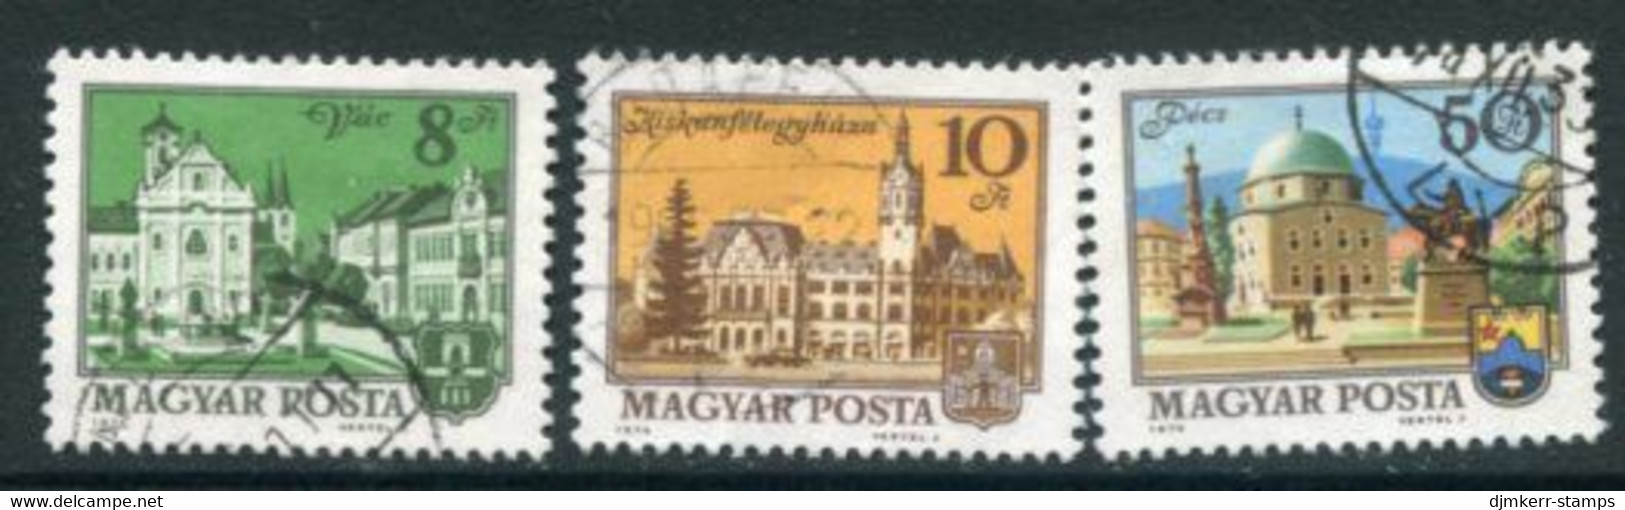 HUNGARY 1974 Towns Definitive 8, 10, 50 Ft. Used.  Michel 3001-003 - Used Stamps